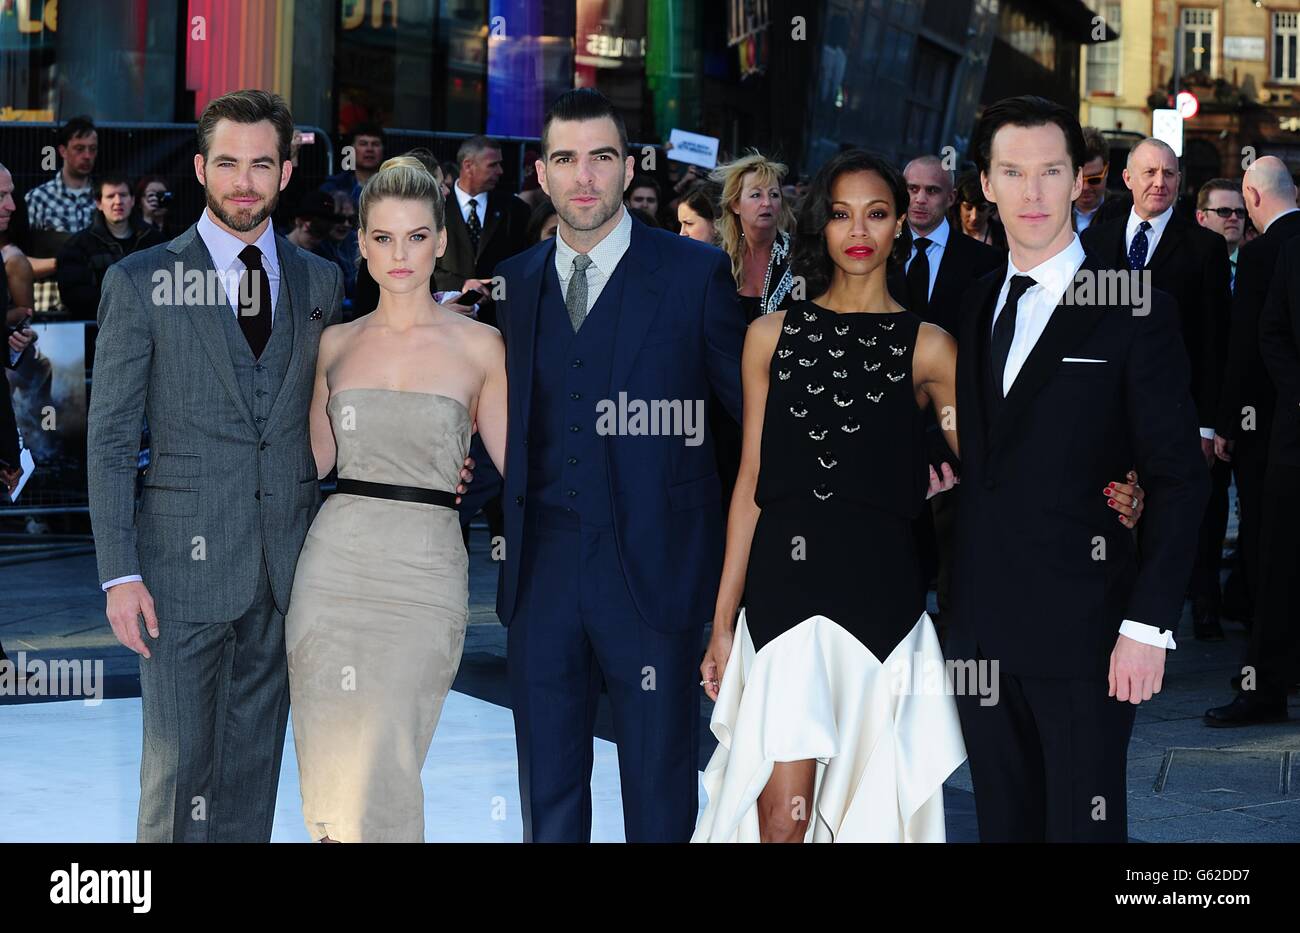 Chris Pine, Alice Eve, Zachary Quinto, Zoe Saldana and Benedict Cumberbatch arriving for the premiere of Star Trek Into Darkness at the Empire Leicester Square, London. Stock Photo